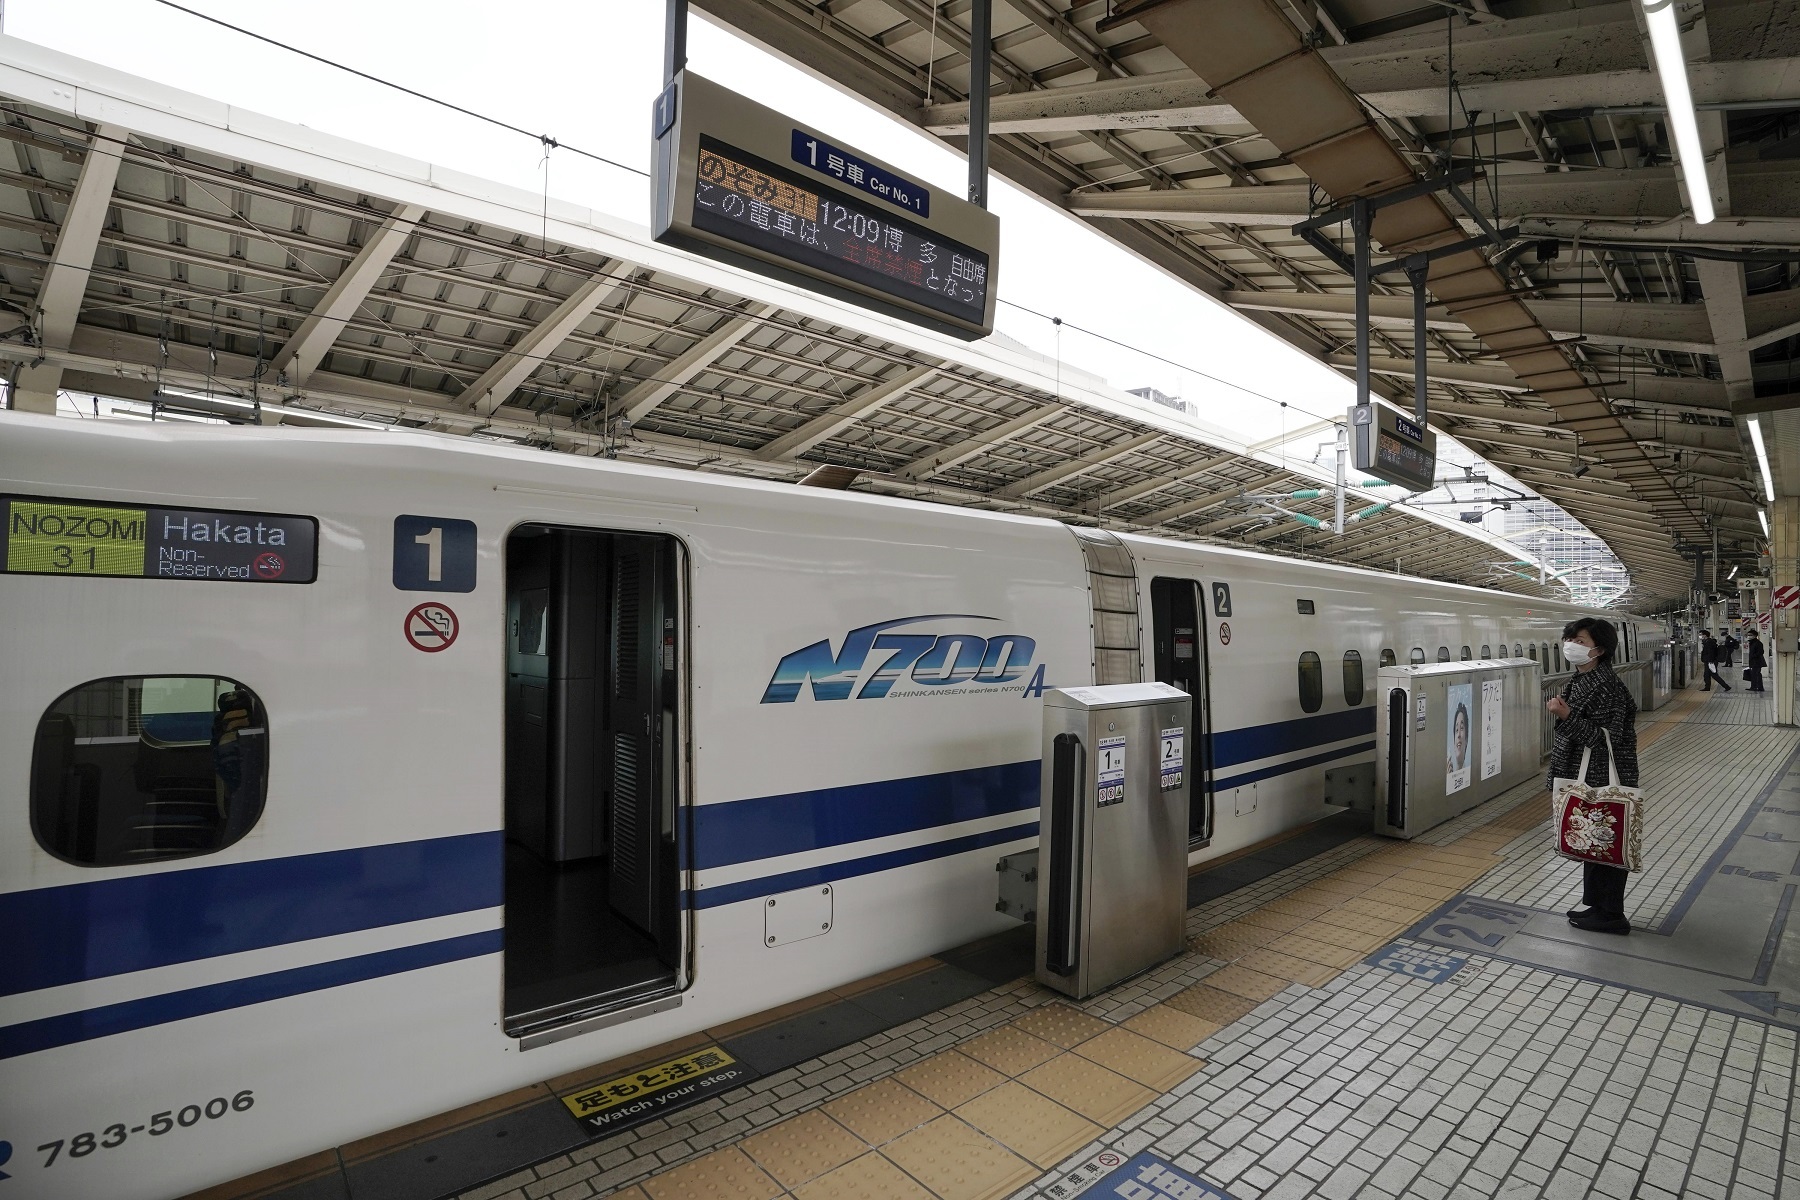 <p>The fastest way of discovering Japan, <a href="https://www.jrailpass.com/shinkansen-bullet-trains">Shinkansen bullet trains</a> are one of the most iconic features of this modern island nation. </p><p>First-time visitors to Japan should take the <a href="https://www.japan-guide.com/e/e2018_tokaido.html">Tokaido Shinkansen</a> line, which connects Tokyo, Yokohama, Nagoya, Kyoto and Osaka. Not only will it connect you with Japan’s biggest cities, but it will also give you a fleeting glimpse of Mt. Fuji as it speeds by. </p>